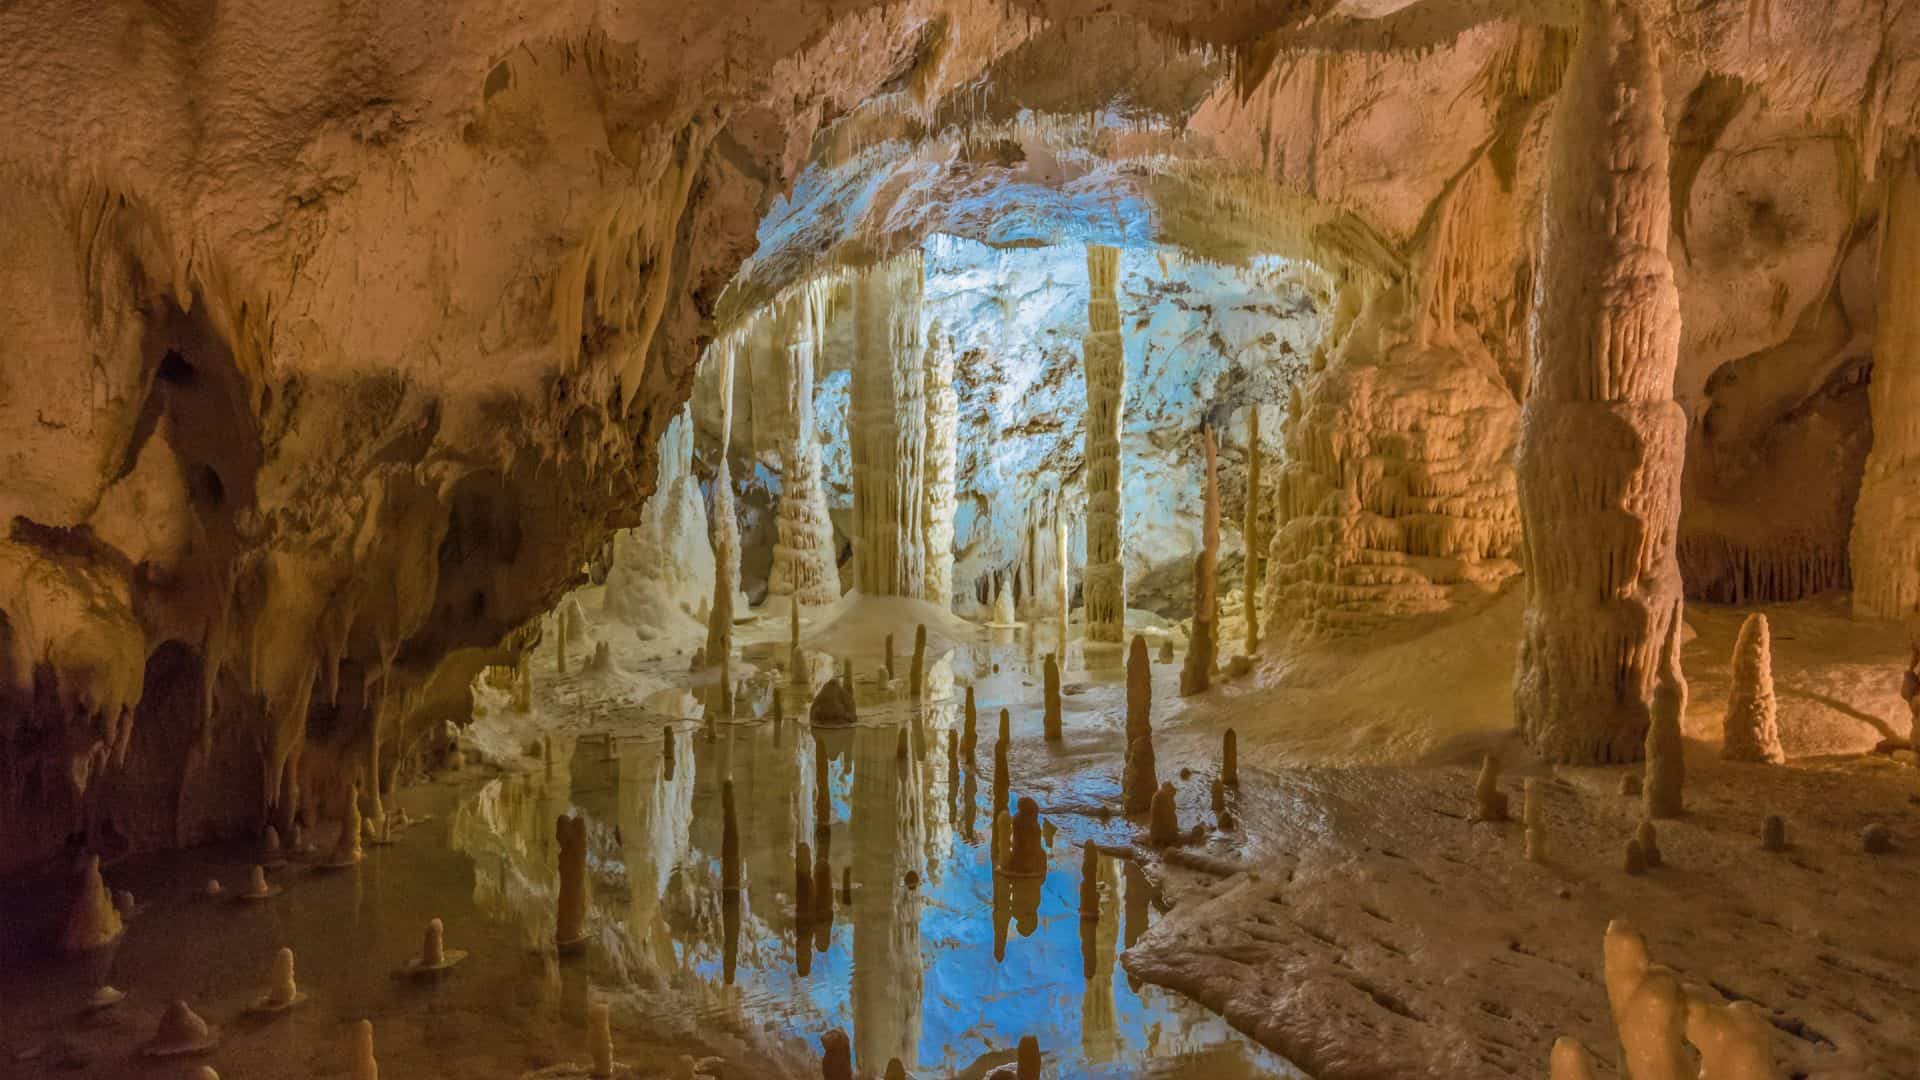 The interior of the Frasassi Caves